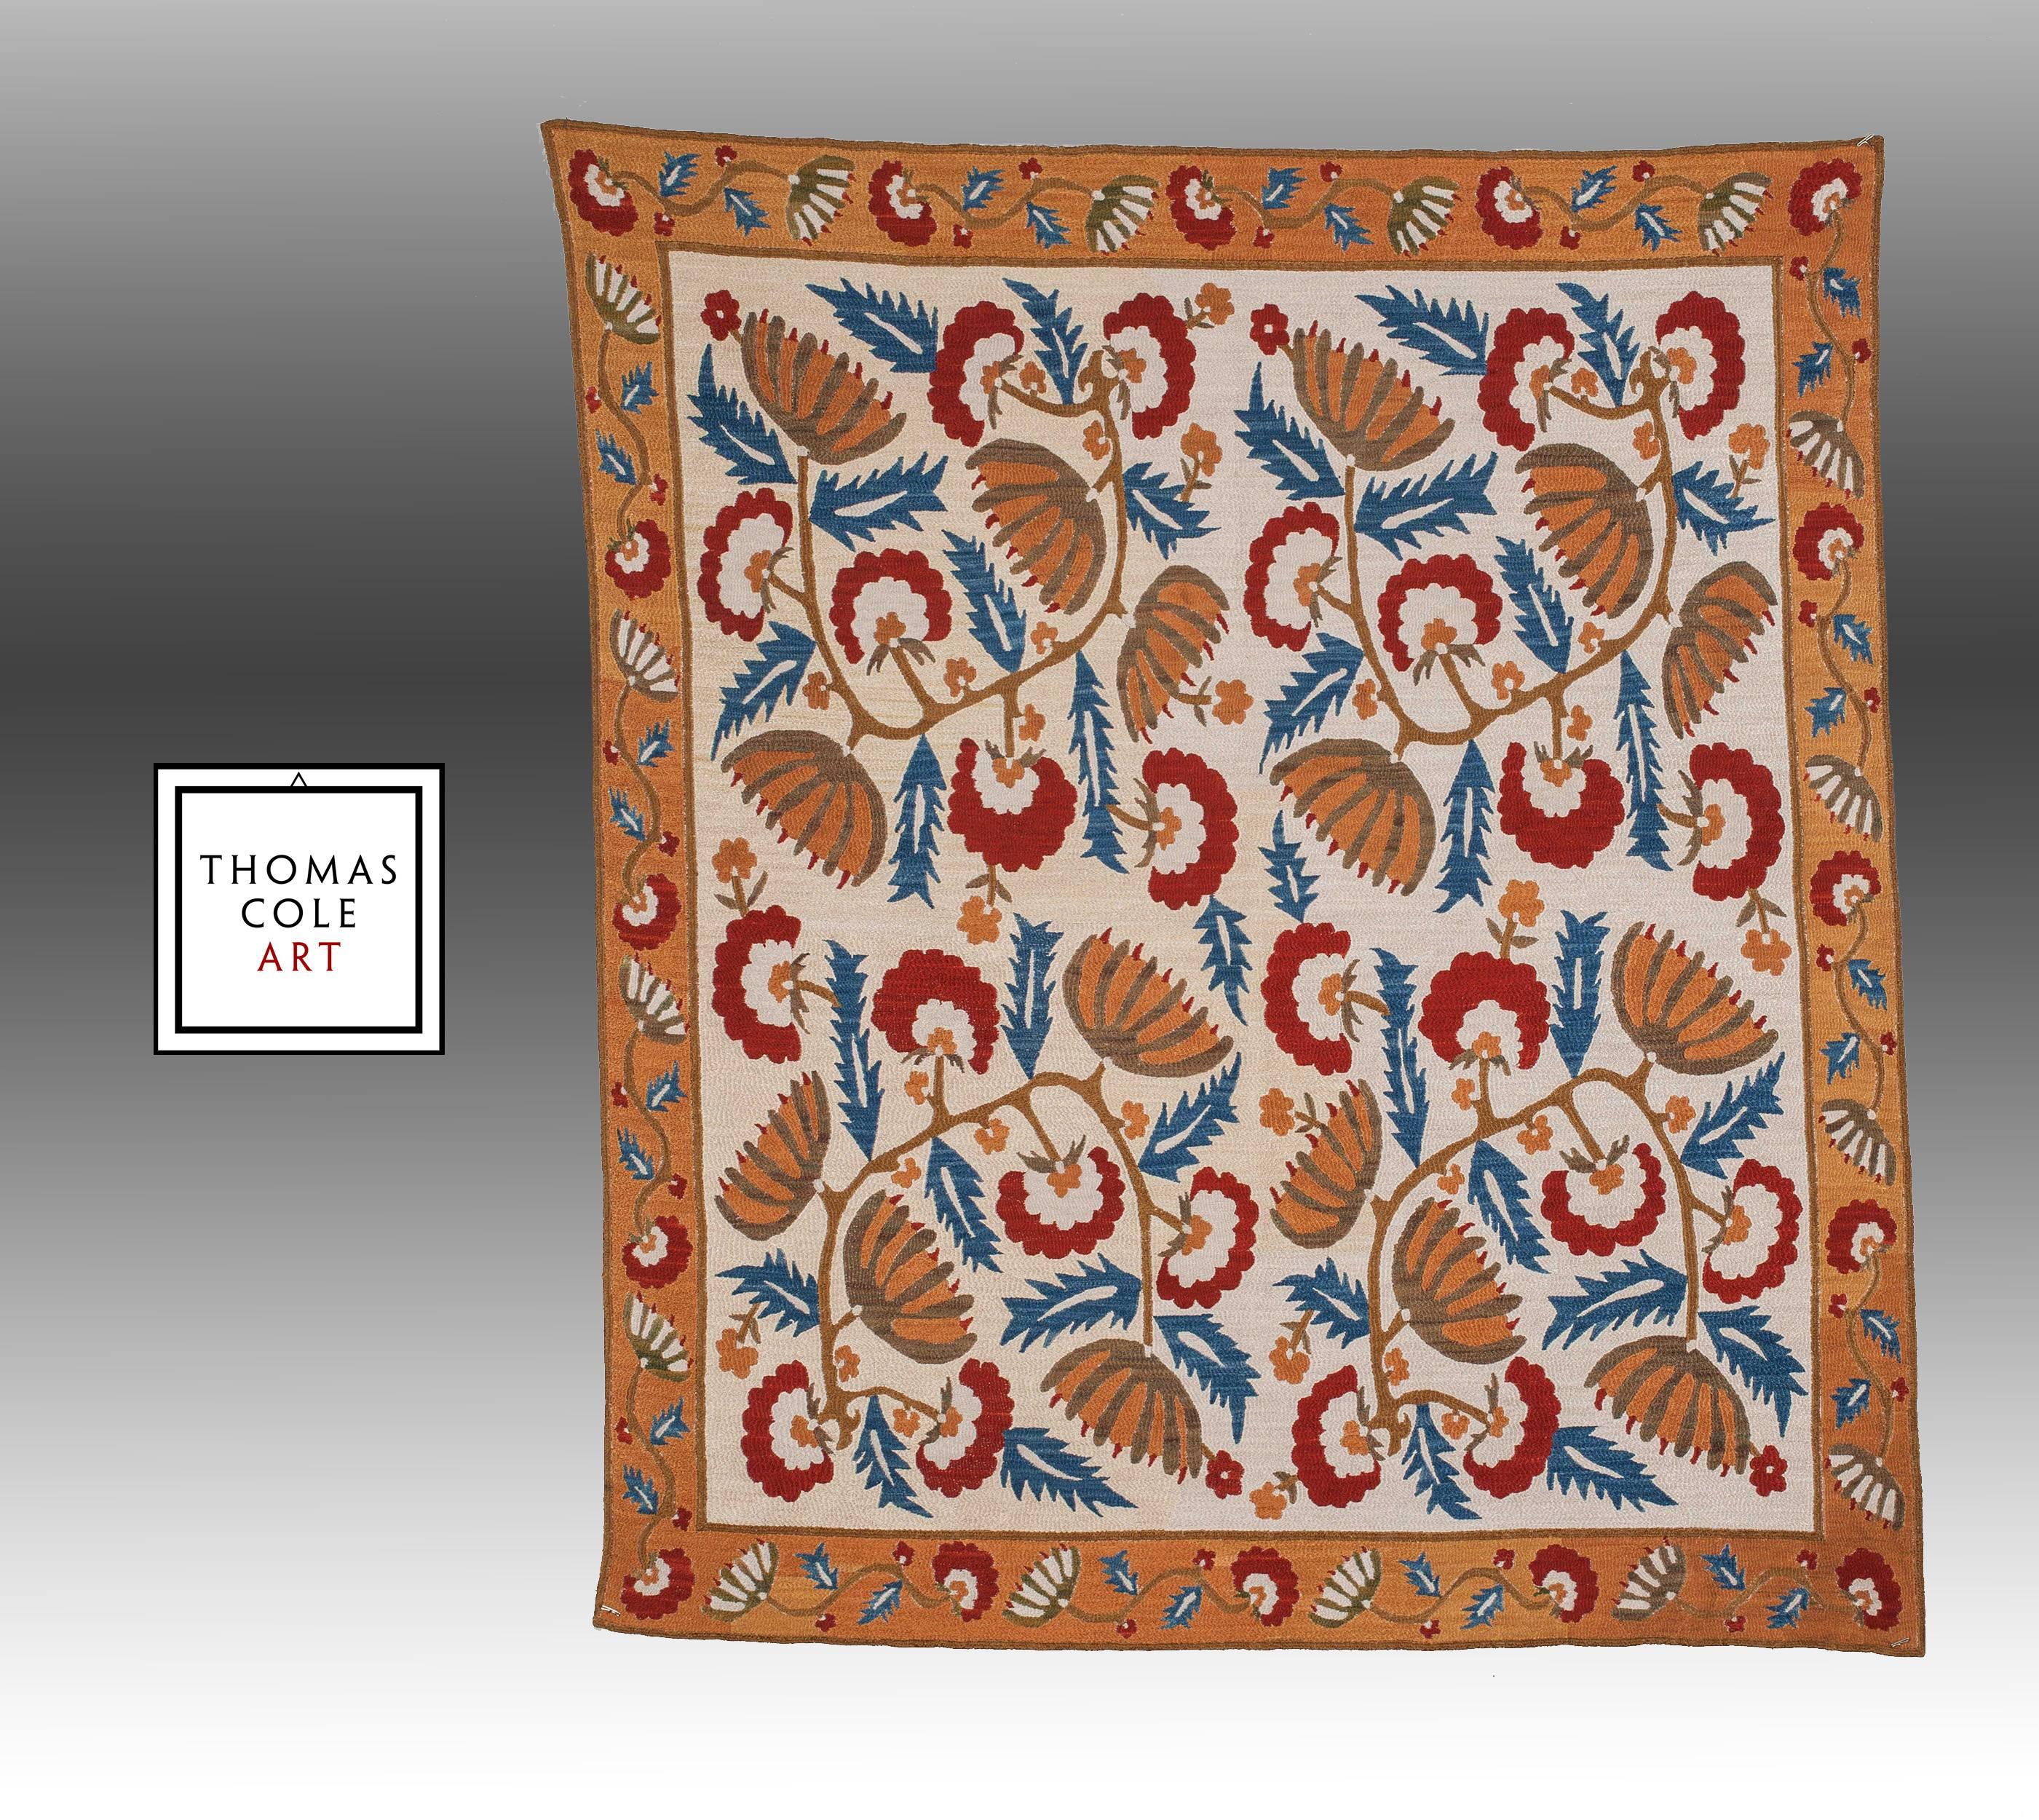 An incredibly beautiful embroidery, made in Armenia in an old style mimicking both designs and the colors of older Ottoman era textile art from the region.

The embroidery consists of pure silk thread embroidery on a cotton ground cloth. All the